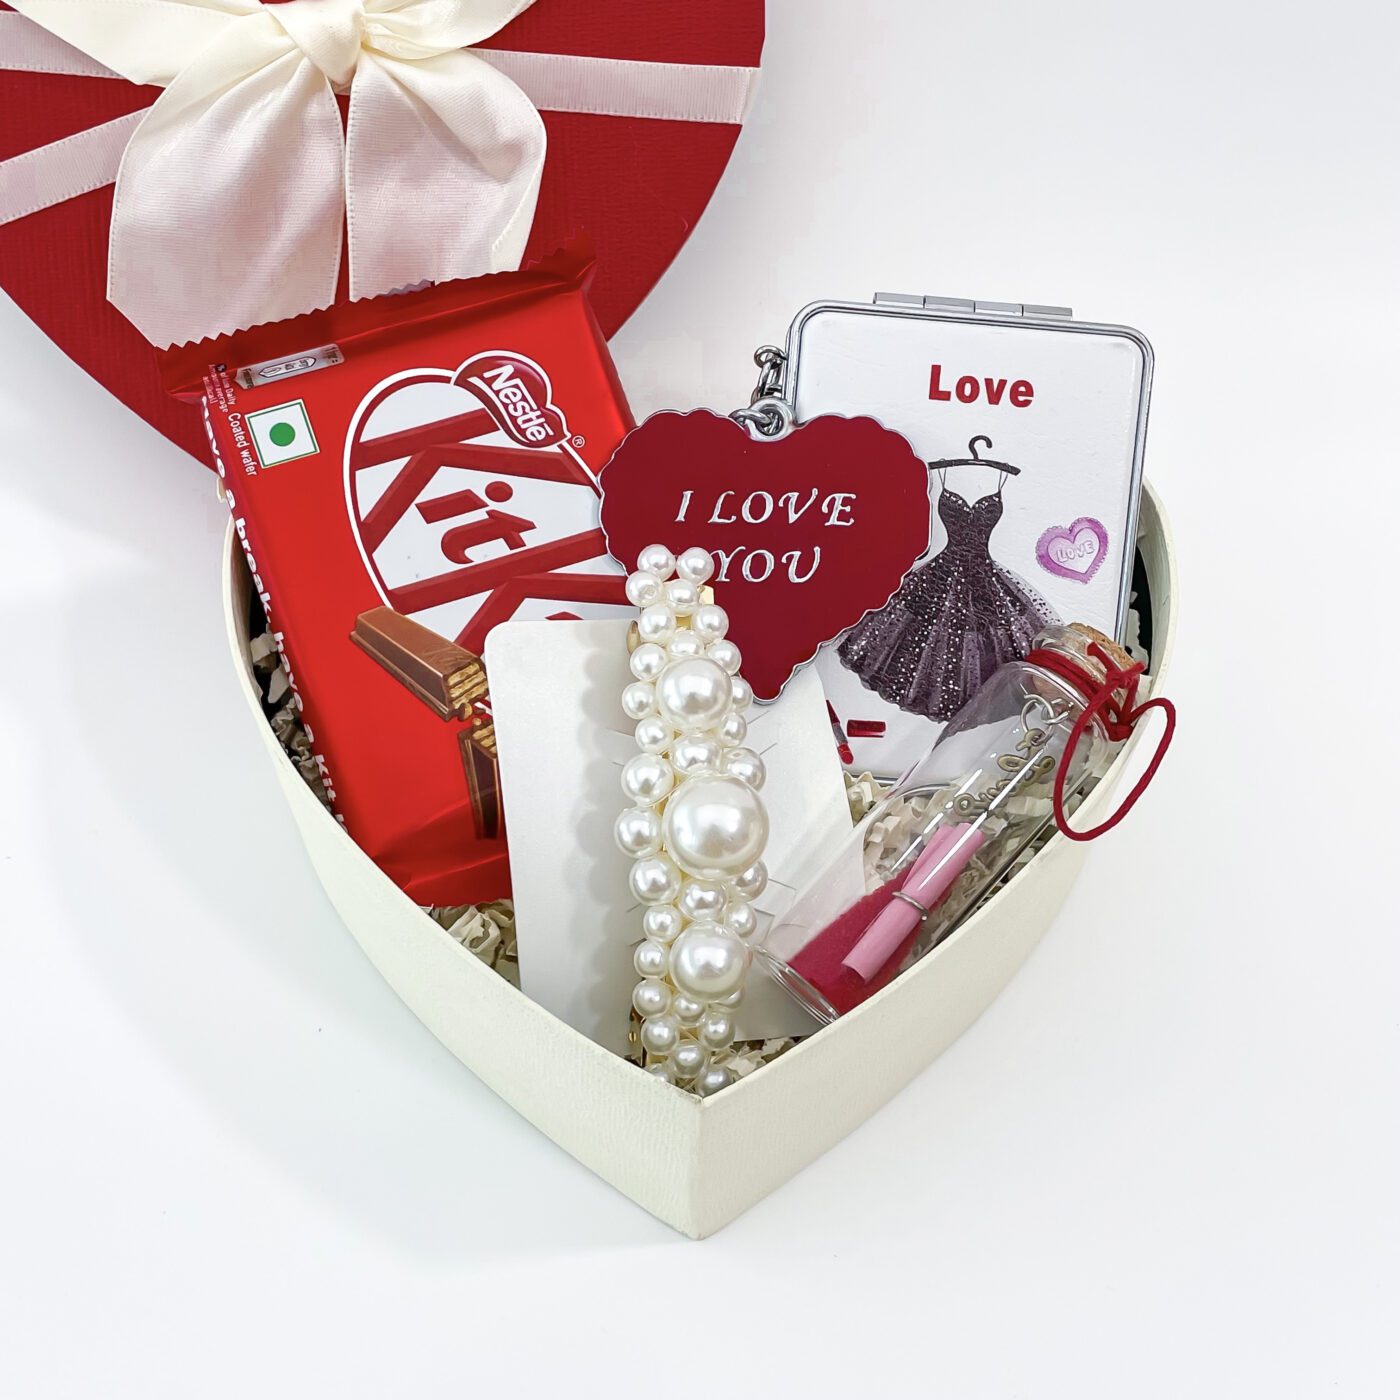 Heart Gift Box | Gift Wrapping Ideas - YouTube